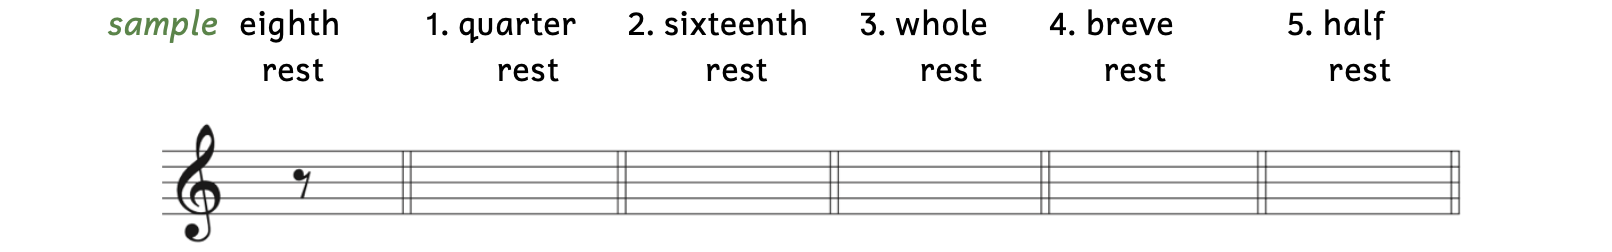 Exercise asks to write various rests on a staff with treble clef. The sample asks for an eighth rest and an eighth rest is written on the staff. Number 1 asks for a quarter rest. Number 2 asks for a sixteenth rest. Number 3 asks for a whole rest. Number 4 asks for a breve rest. Number 5 asks for a half rest.